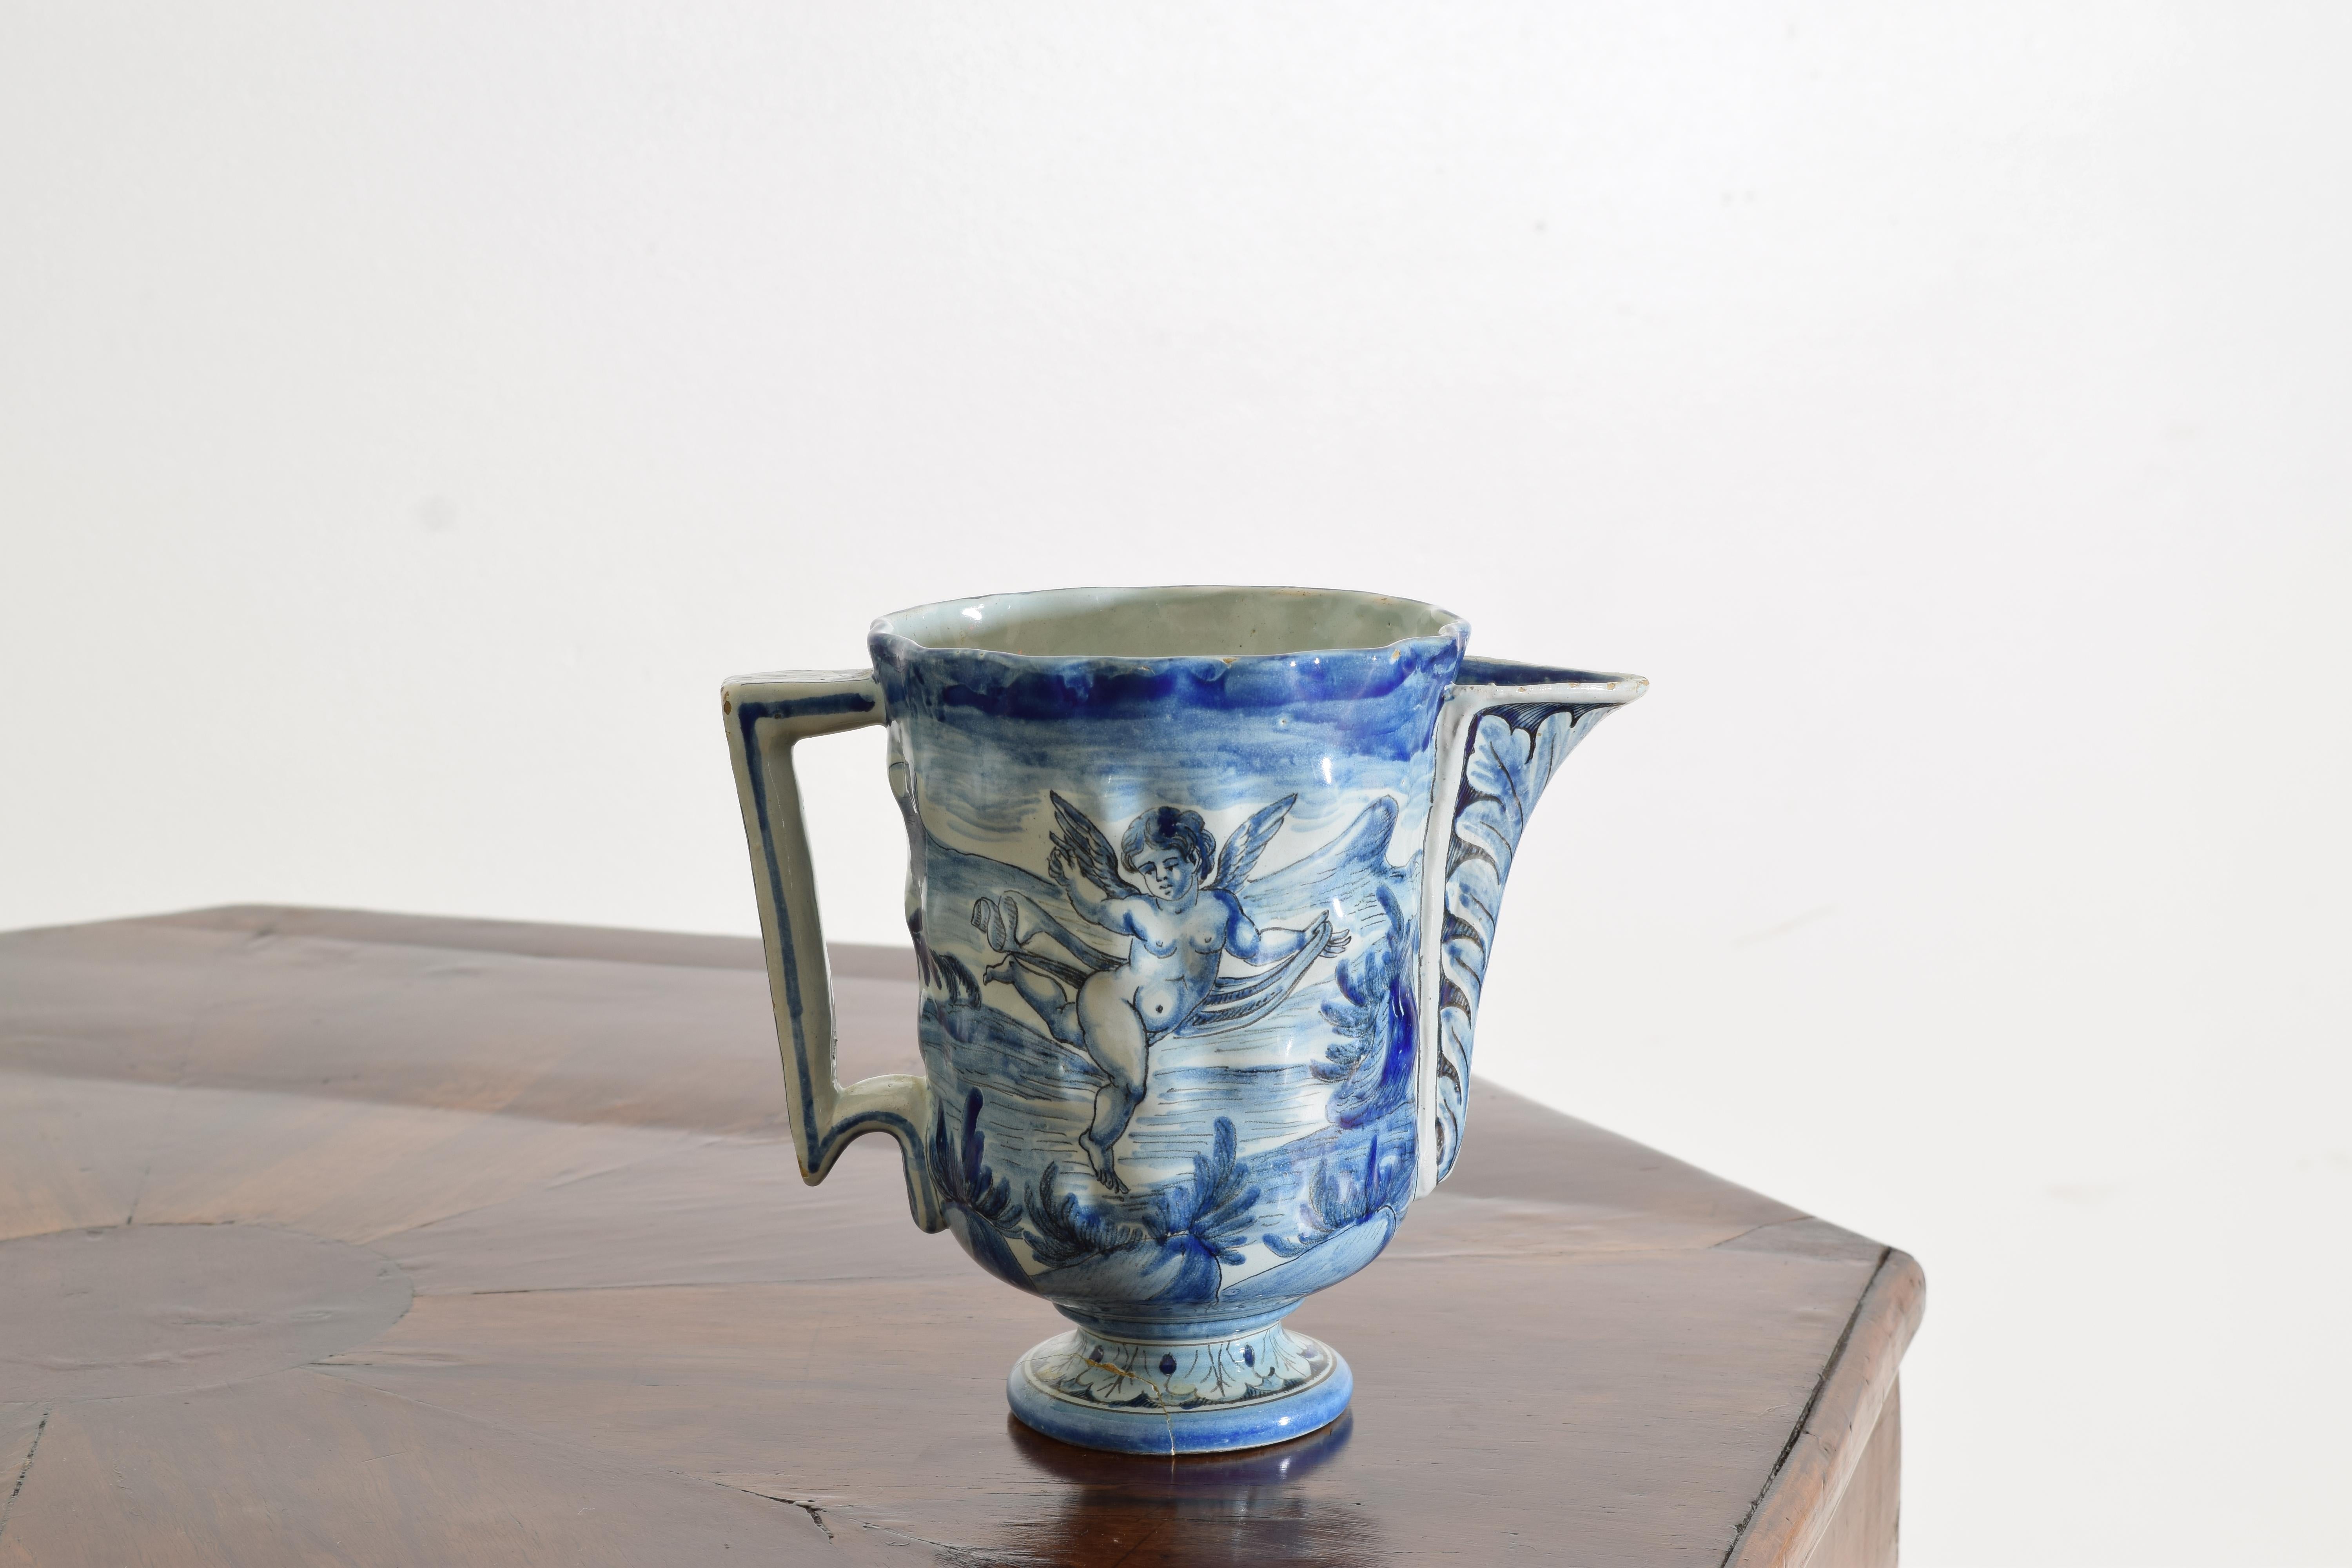 19th century, blue and white painted on one side with a cupid and on the opposite side painted with a village scene, the underside marked with a rooster for Cantagalli Italian majolica.